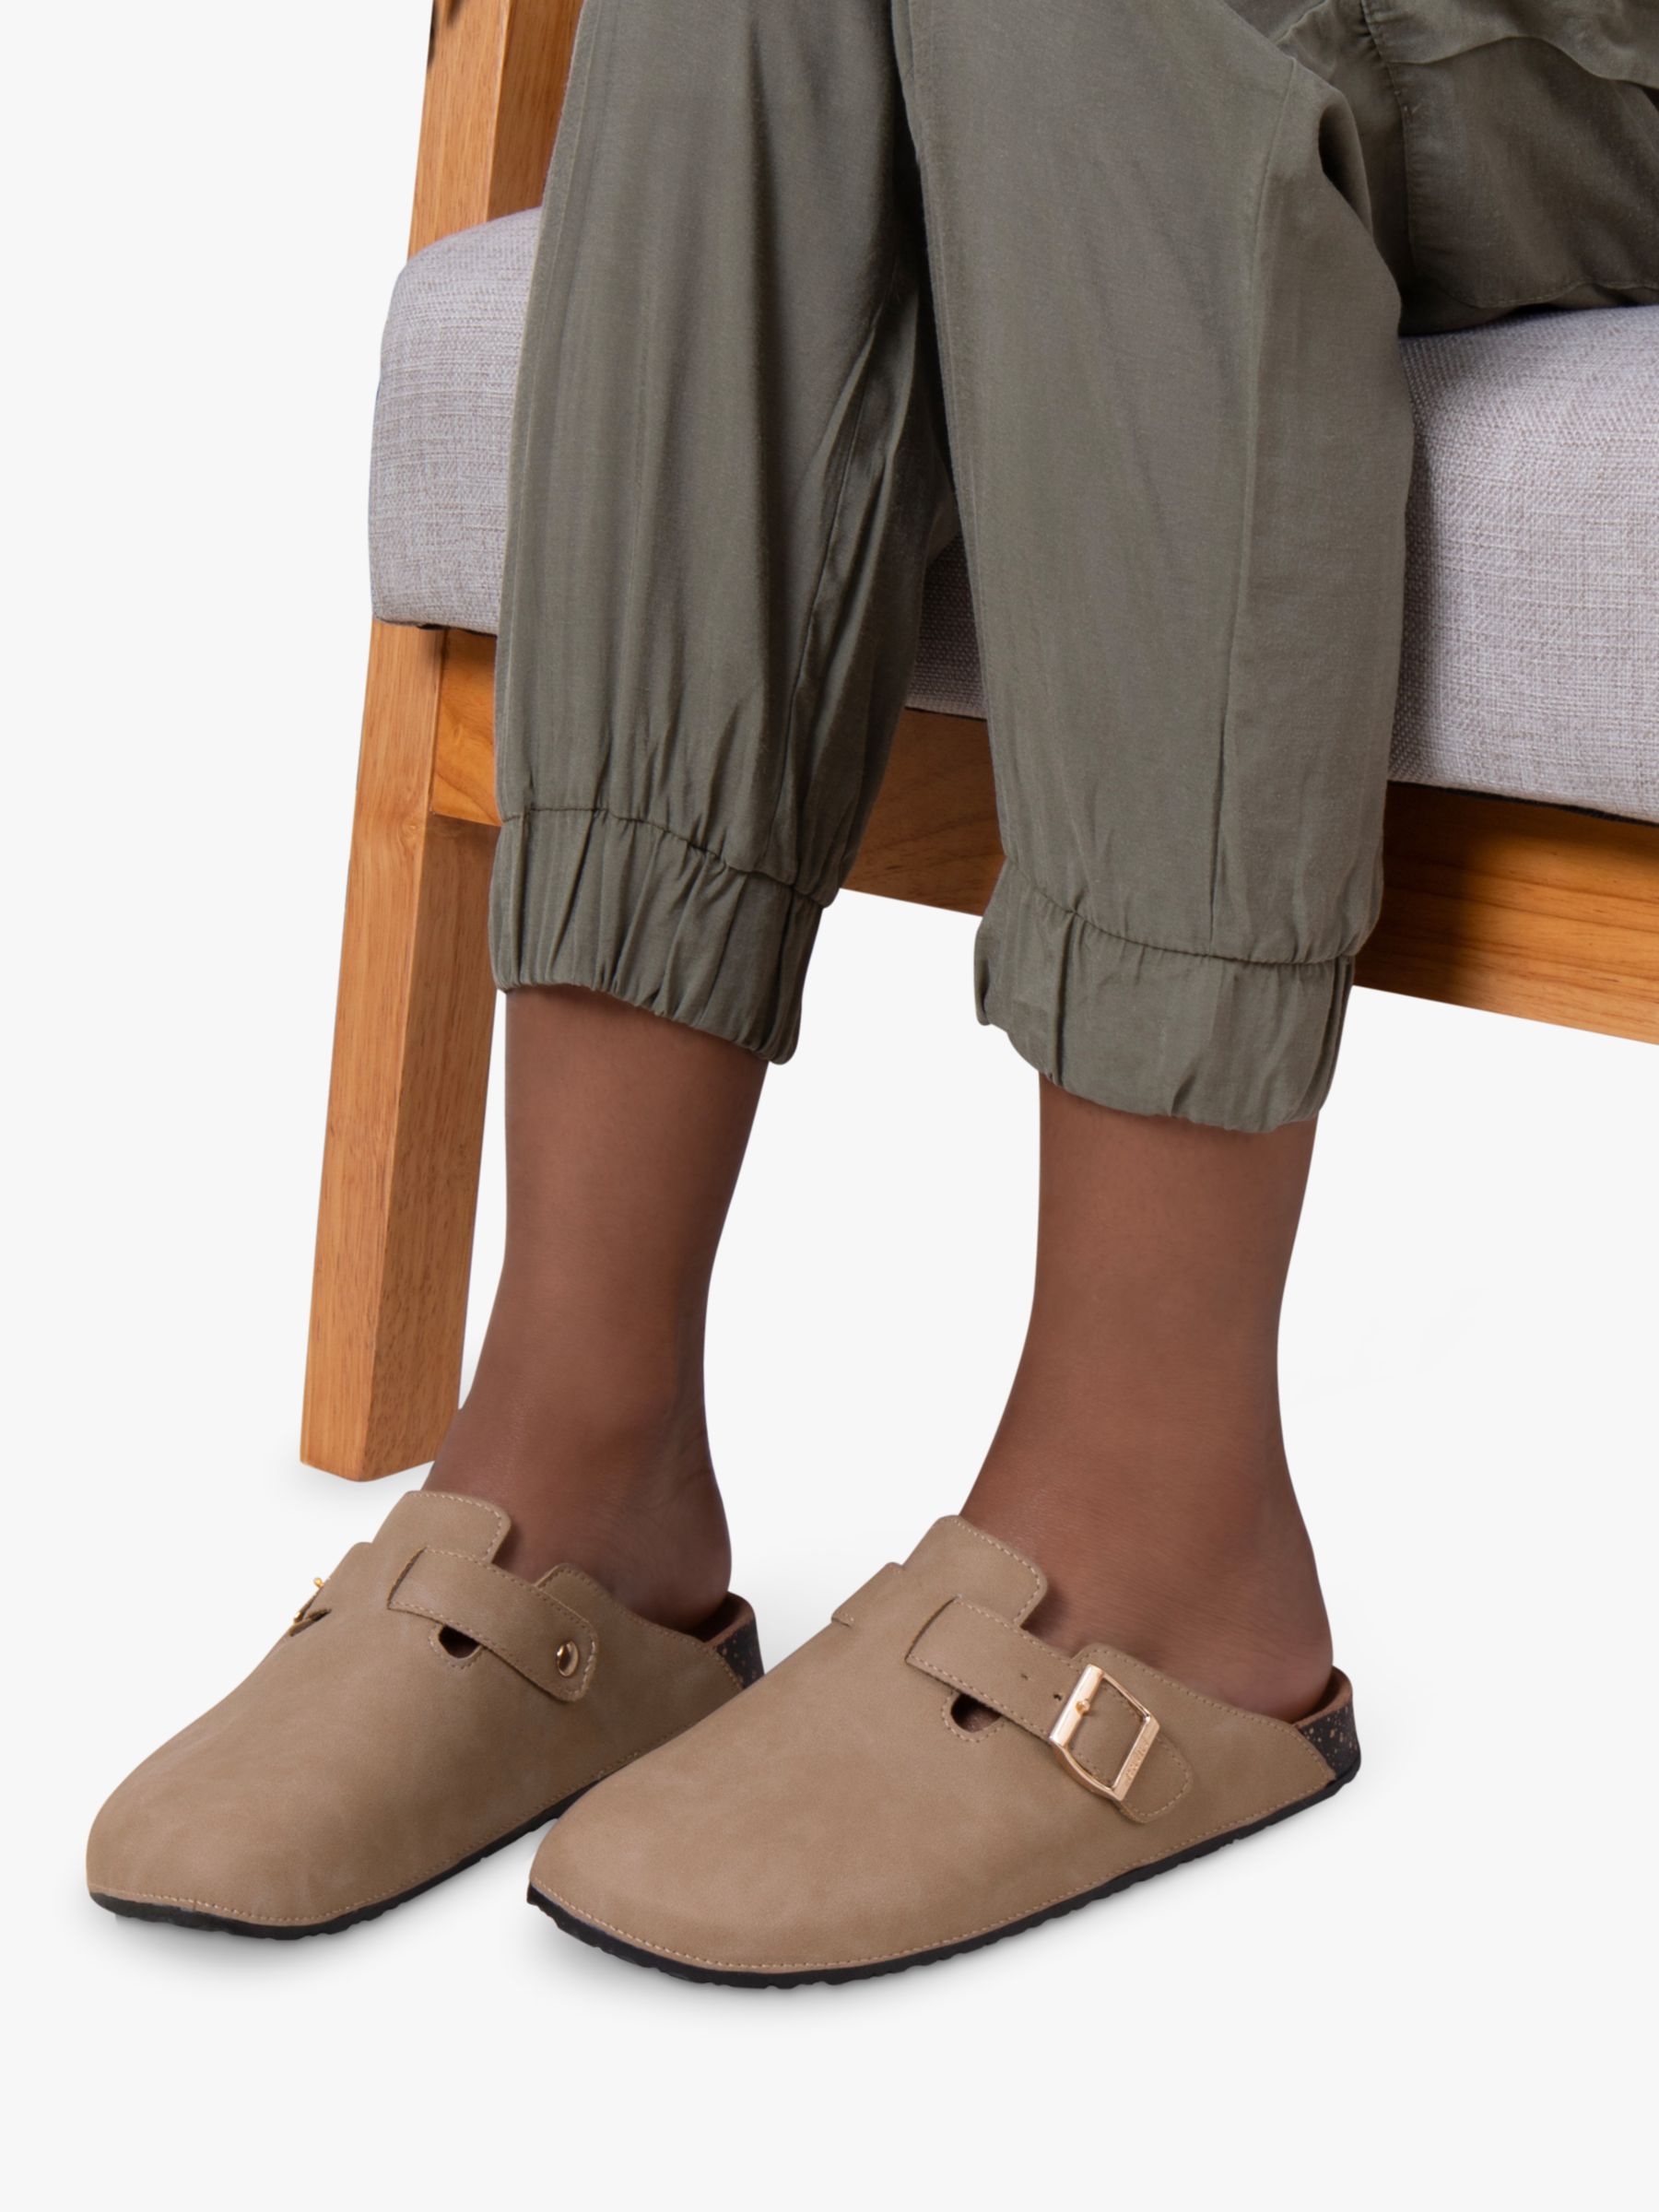 Buy totes Buckle Clogs, Taupe Online at johnlewis.com